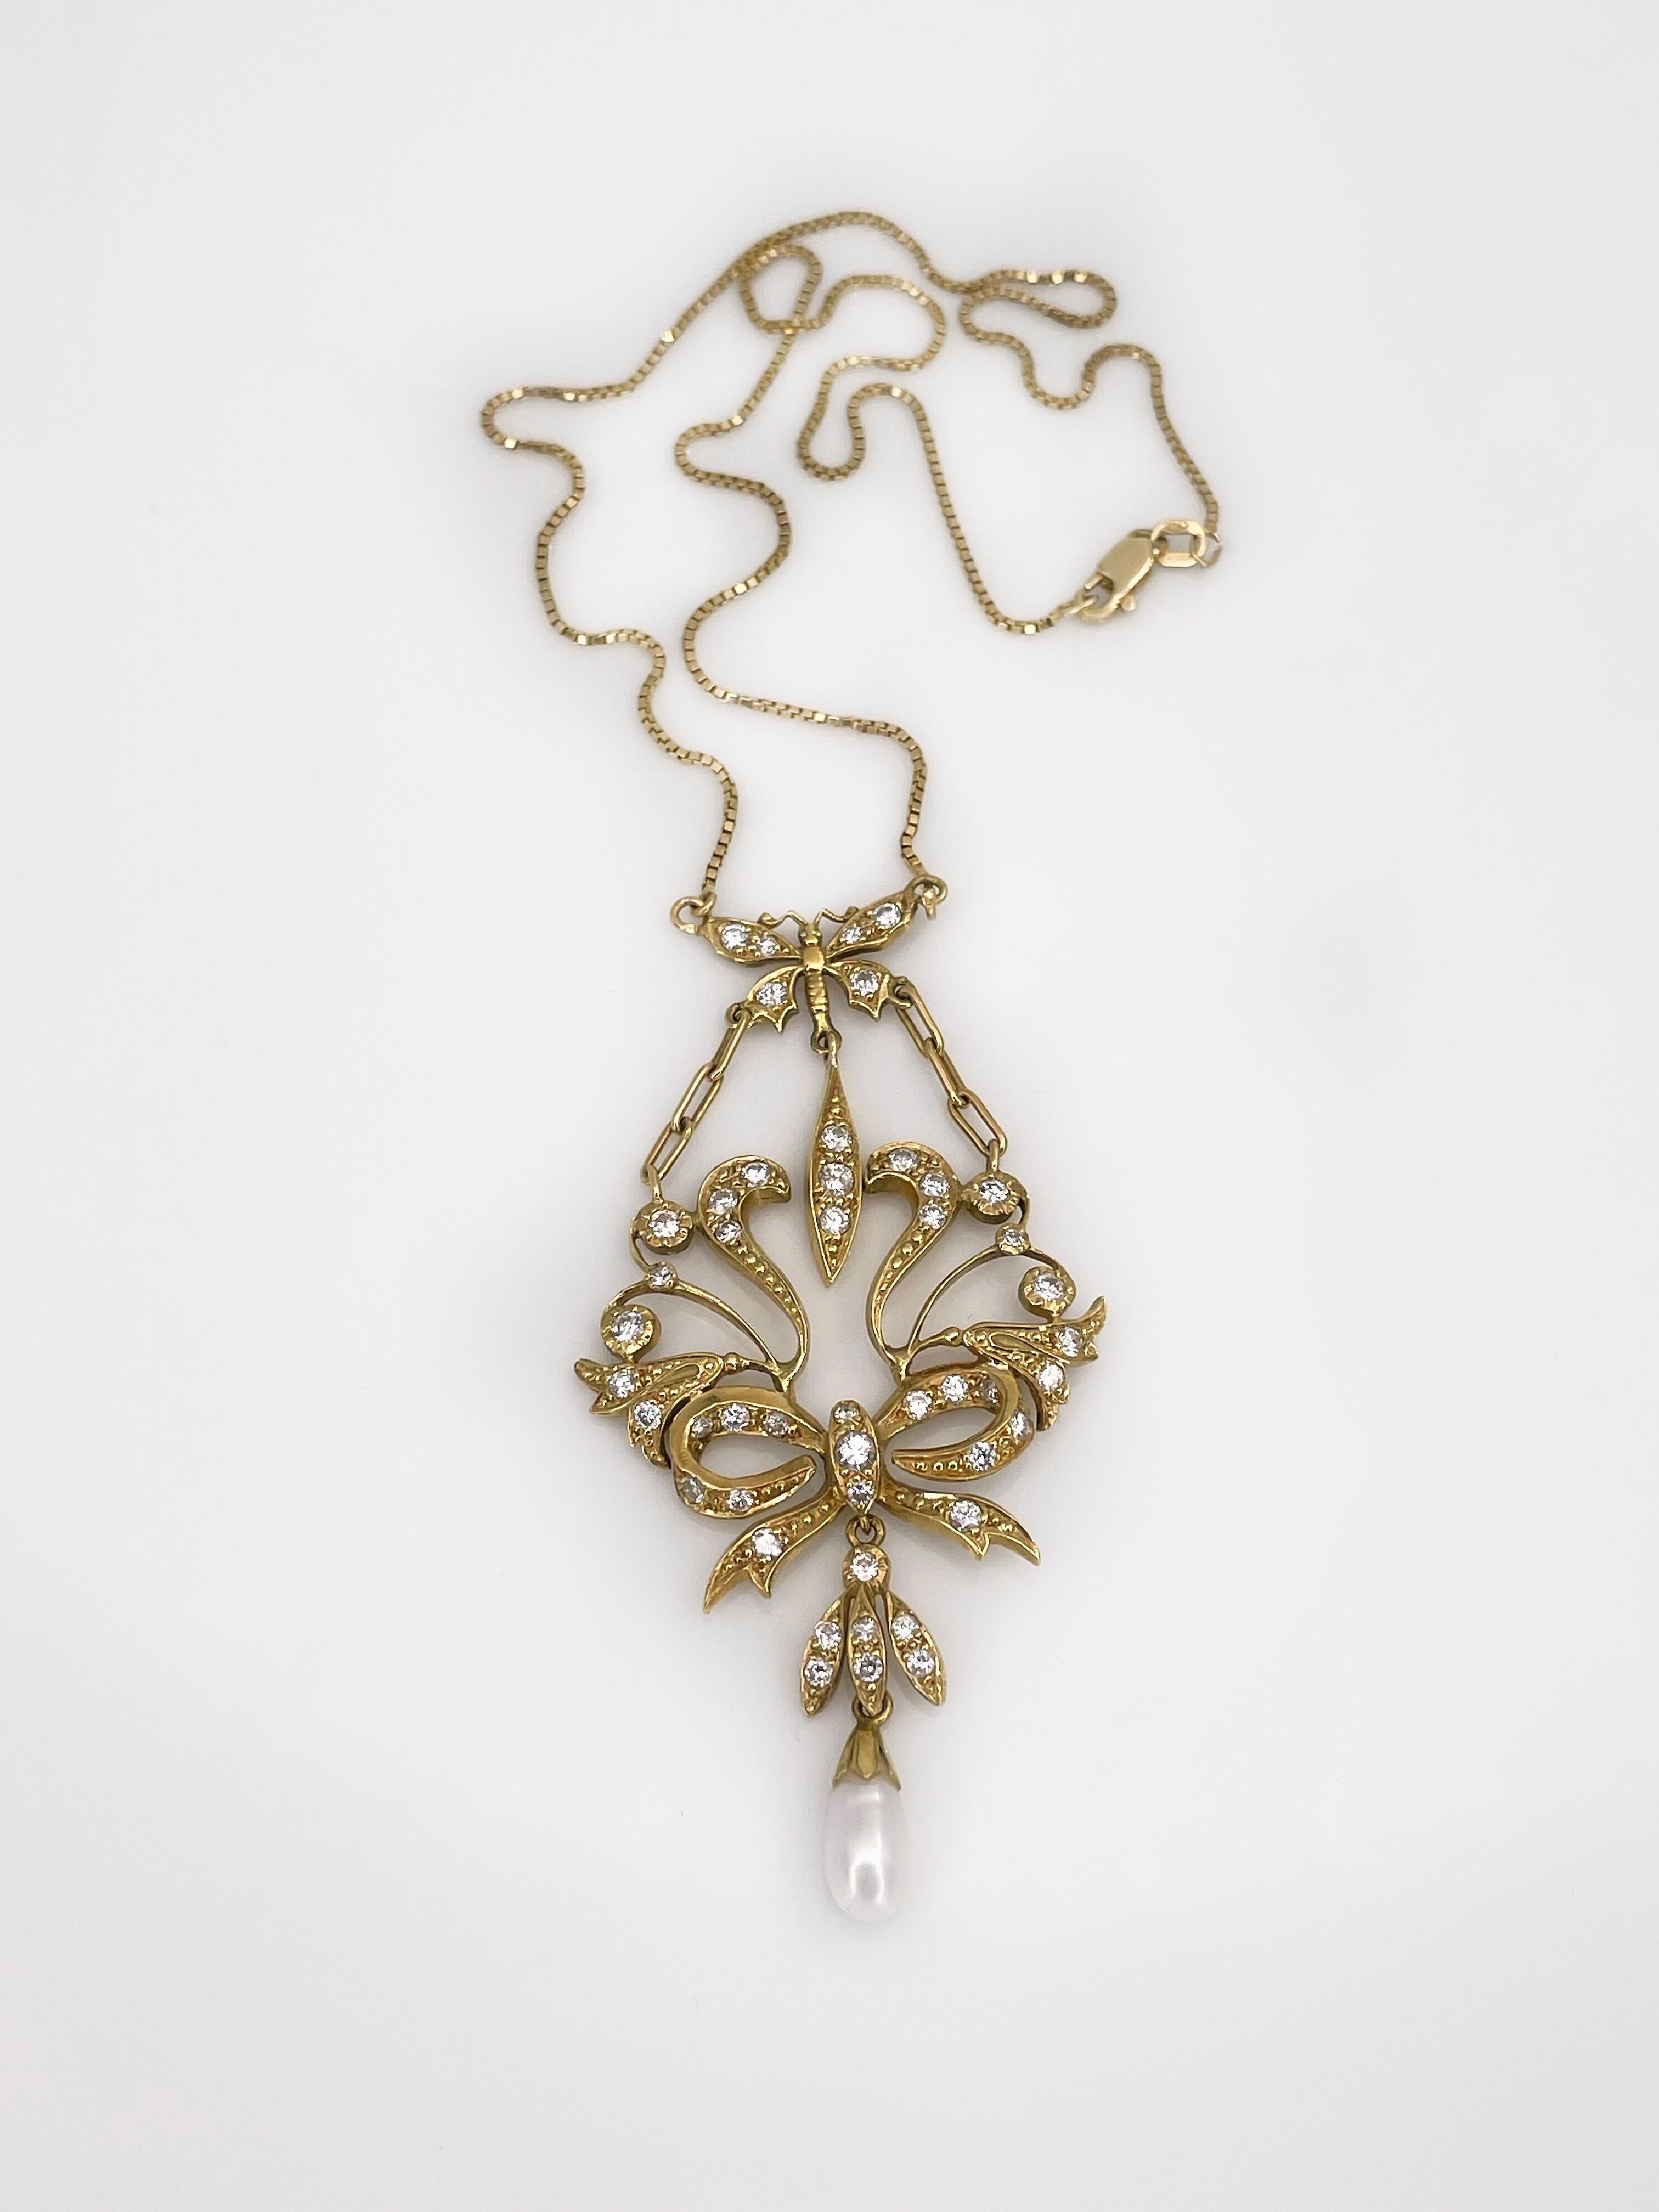 A romantic Mid century 18K yellow gold necklace with attached pendant in the style of a 'lavalier'. The design features a bow and a butterfly. It has been set with 47 brilliant cut diamonds, that in total weight 1,50ct. Color is W-STW, and clarity